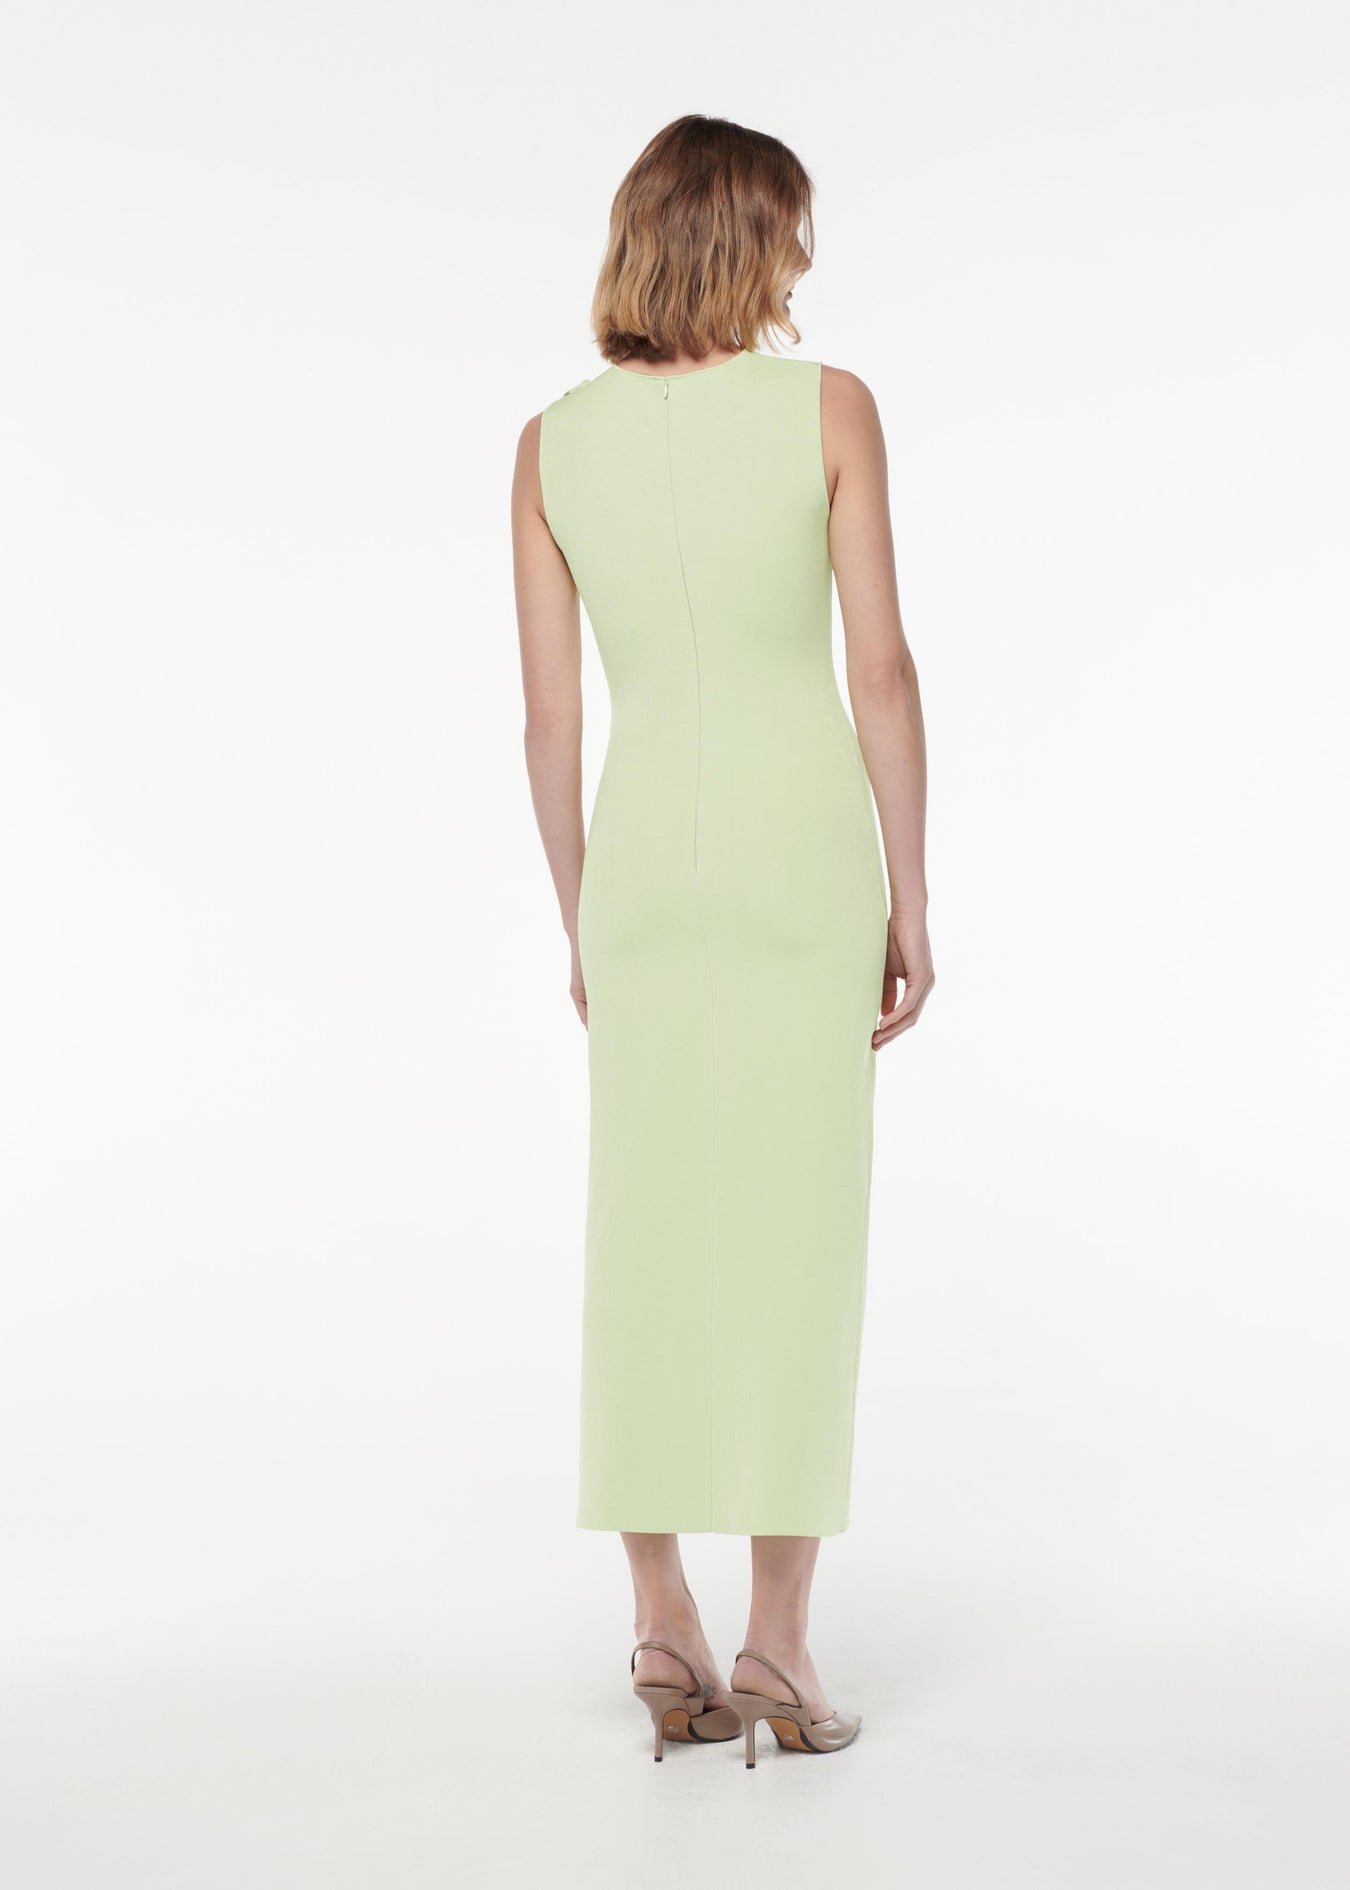 A photograph of a woman wearing a Flat Knit Bow Midi Dress in Green